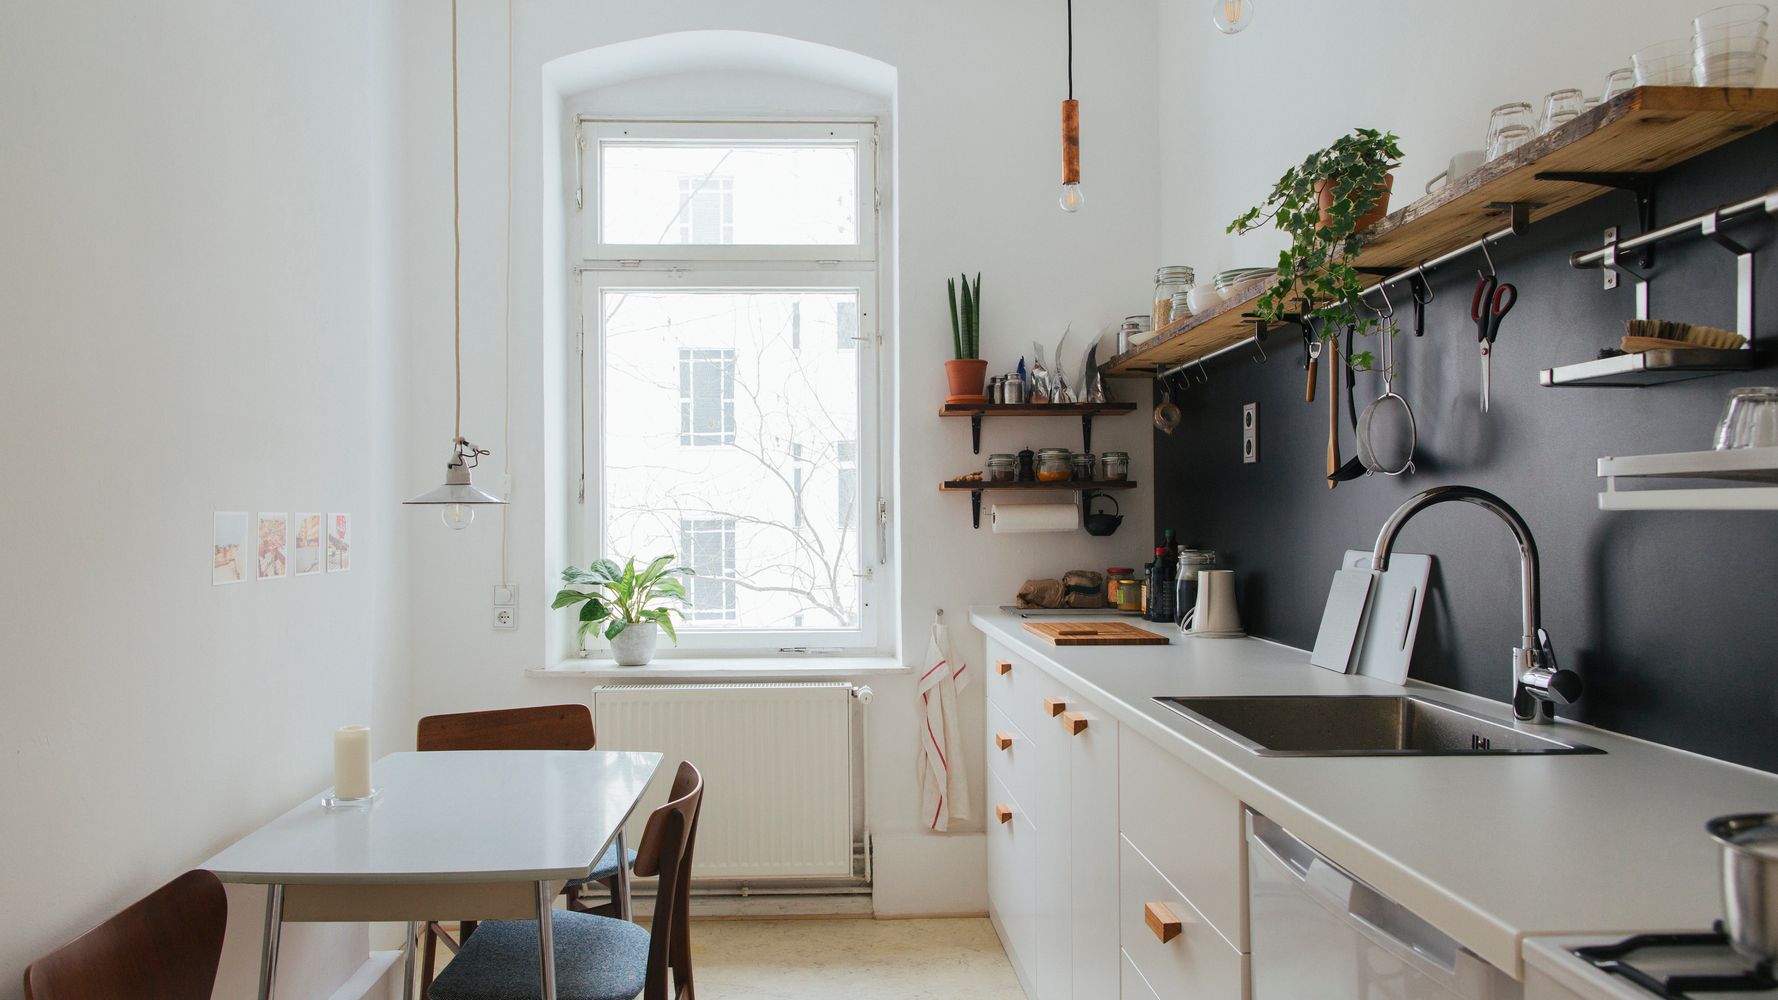 15 Minimalist Home Decor Stores For Decorating On A Budget Huffpost Life